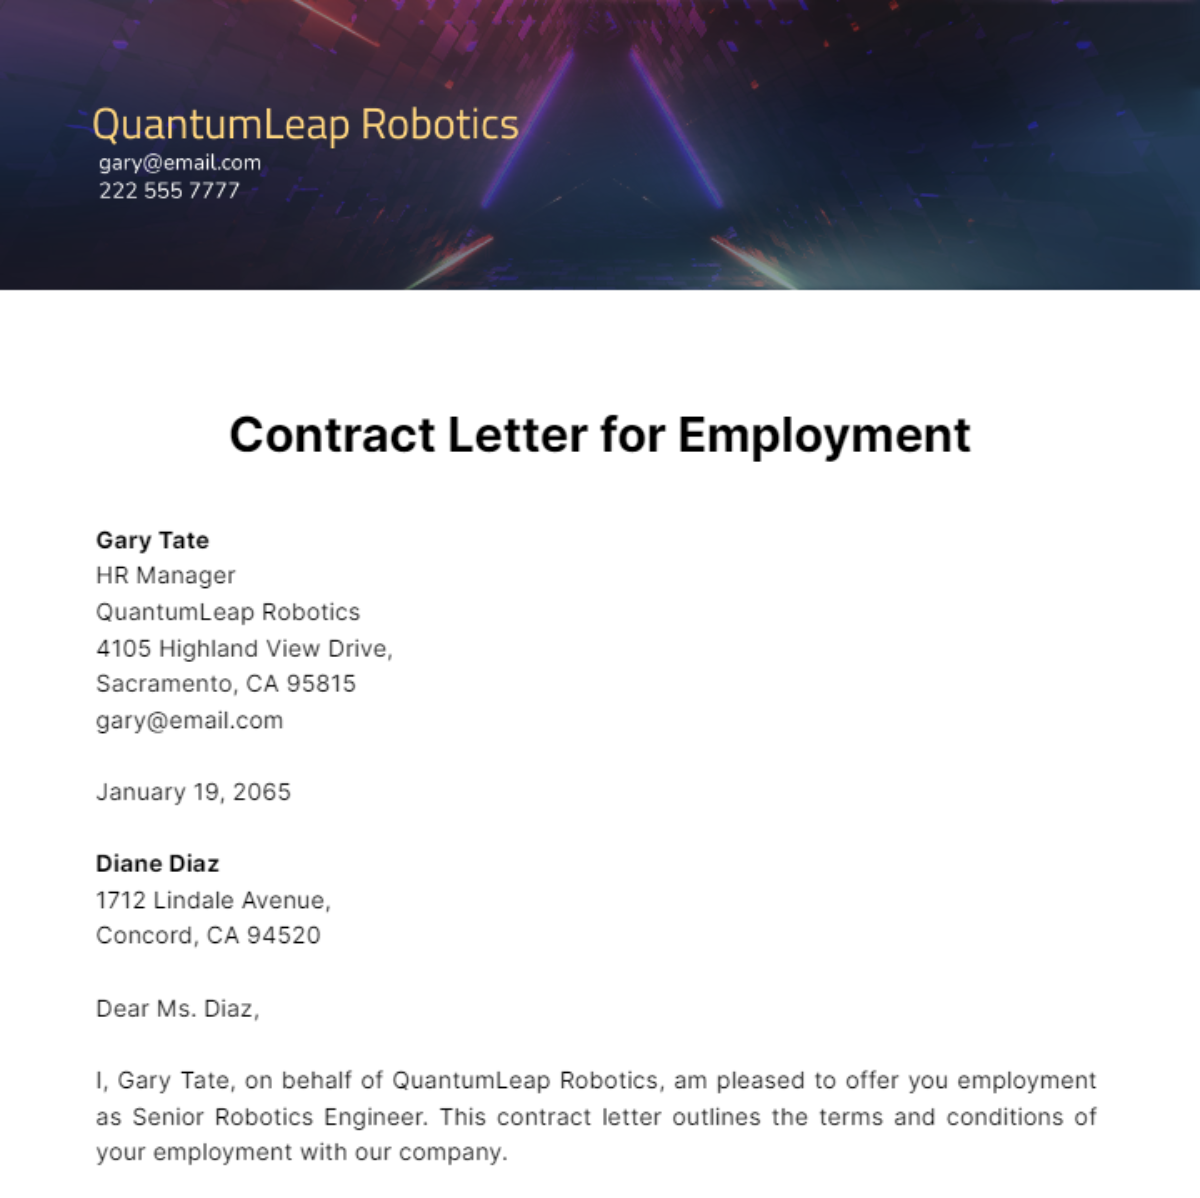 Contract Letter for Employment Template